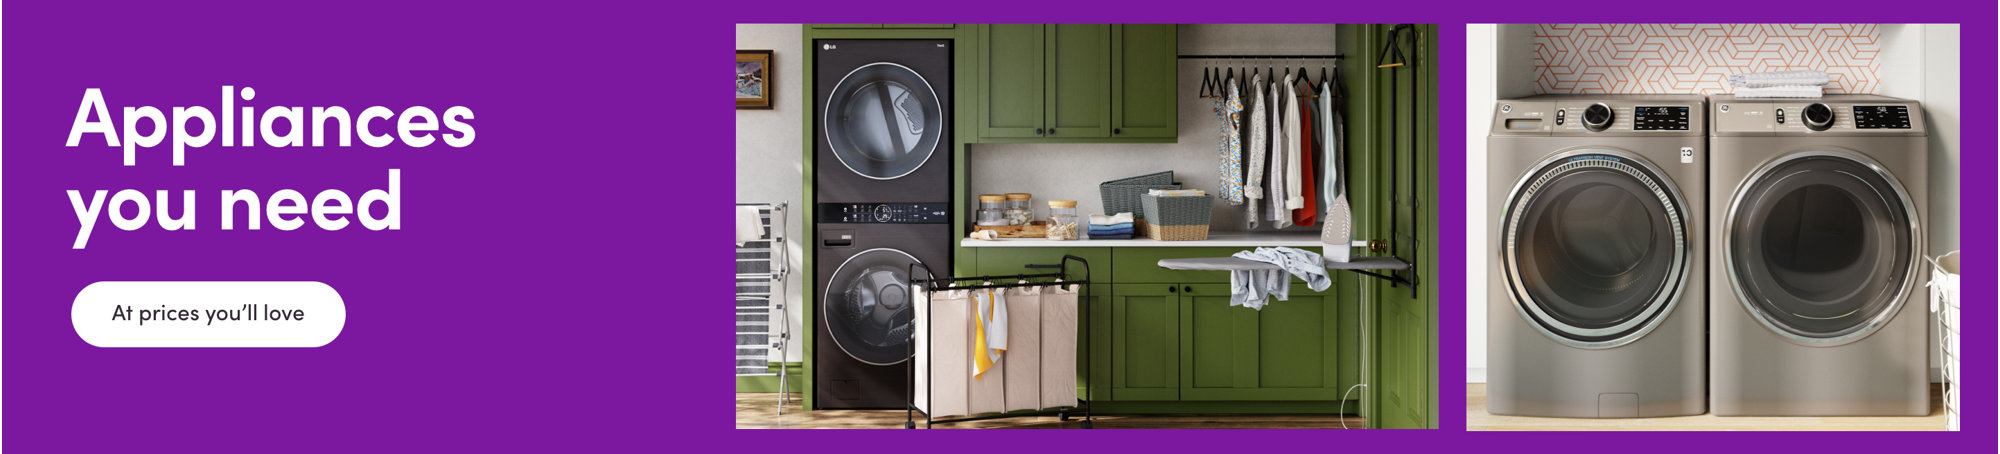 appliances you need at prices you'll love